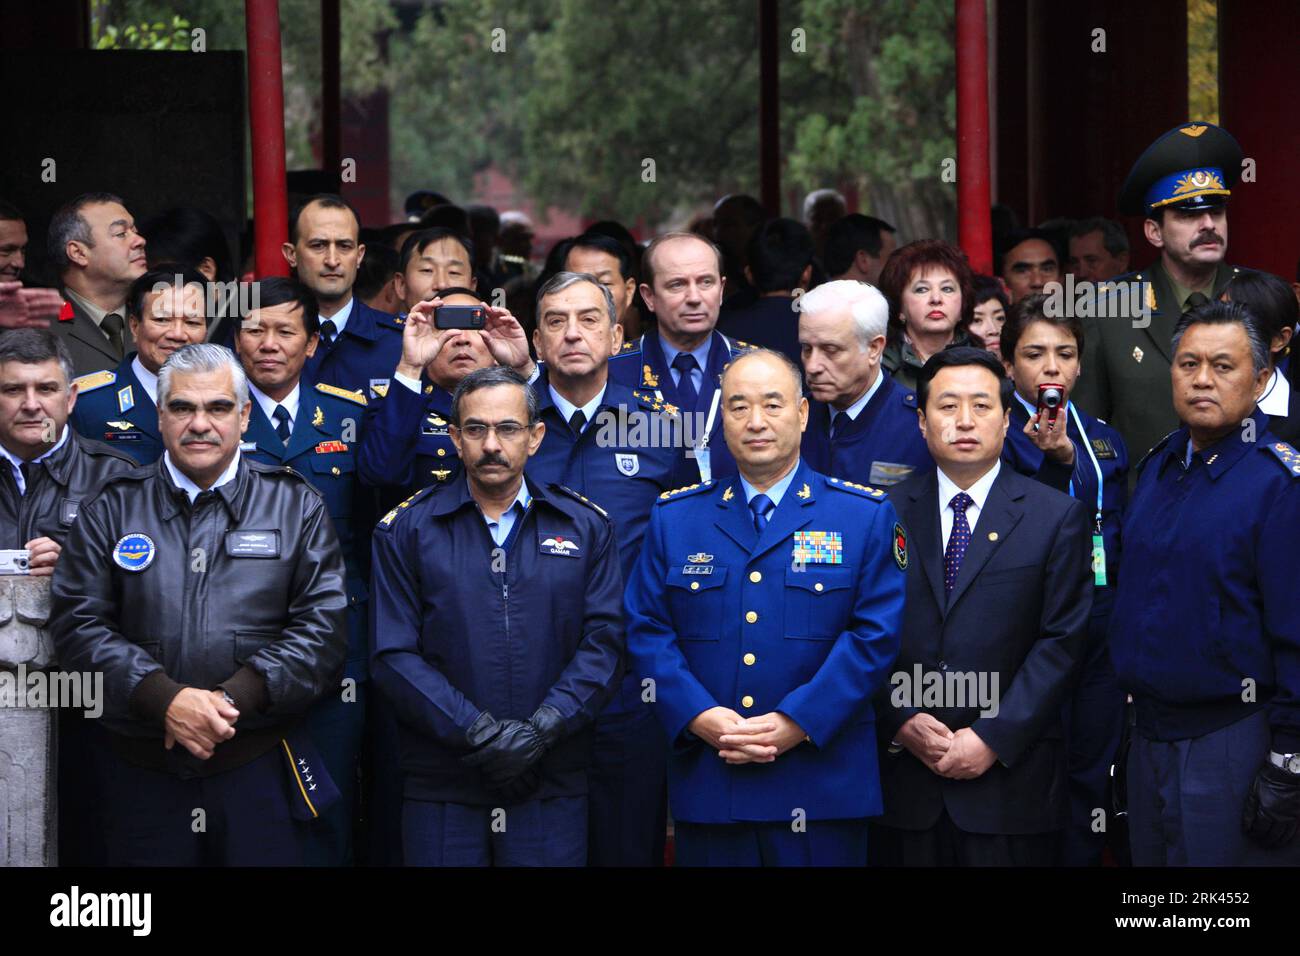 Bildnummer: 53587730  Datum: 09.11.2009  Copyright: imago/Xinhua (091109) -- QUFU, Nov. 9, 2009 (Xinhua) -- Chinese  Liberation Army Air Force Commander Xu Qiliang (3rd R, front) and foreign air force representatives pose for a group photo at the Confucius Temple in Qufu, east China s Shandong Province, Nov. 9, 2009. Air force representatives of 32 foreign countries, who have attended an international forum on peace and development marking the 60th anniversary of the founding of the Air Force of the Chinese  Liberation Army, on Monday visited Qufu, the birthplace of the great thinker and philo Stock Photo